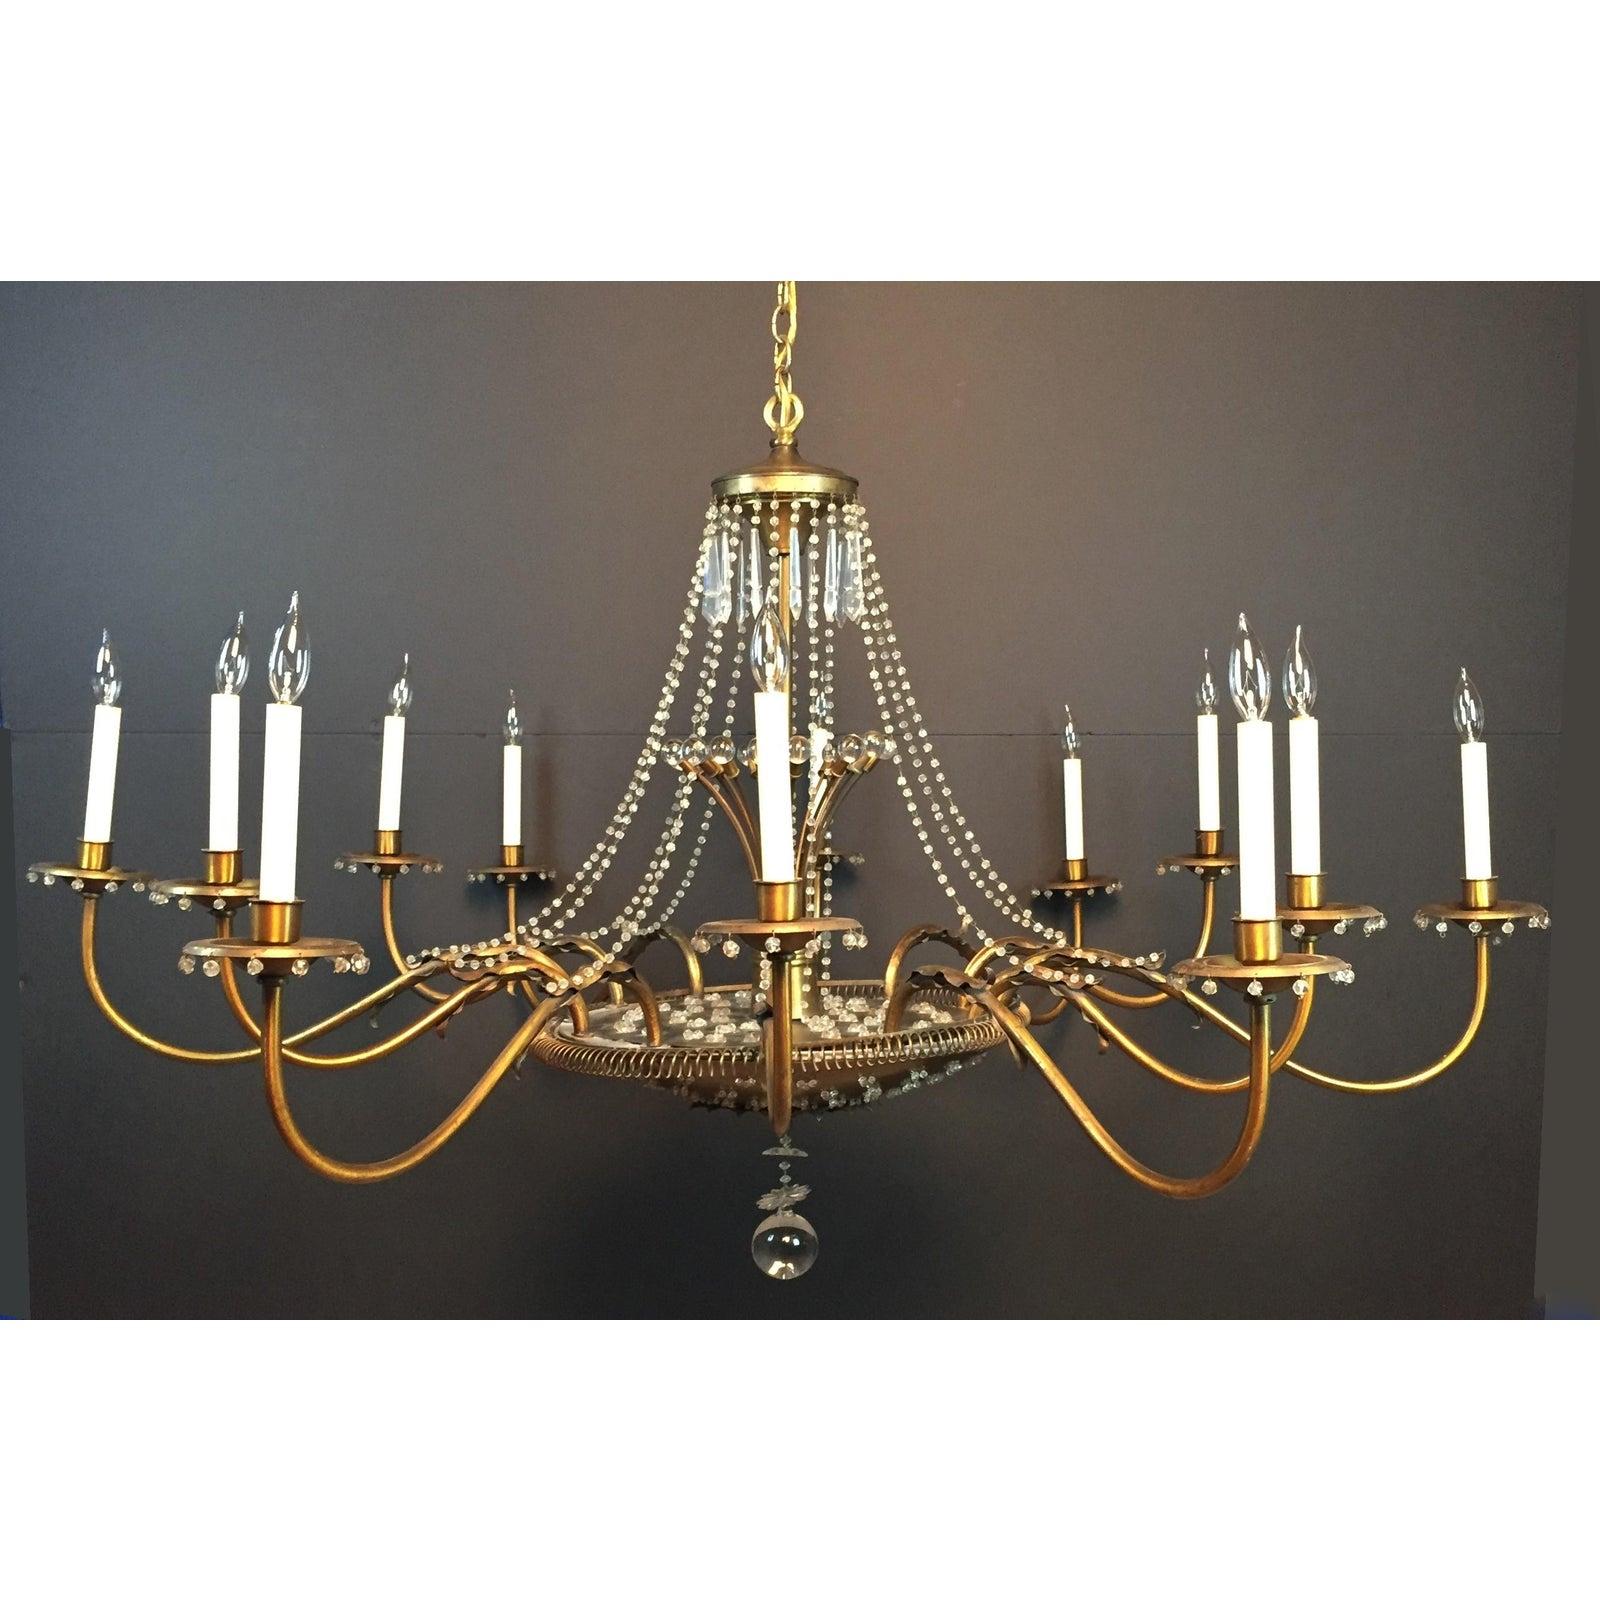 Paavo Tynell (attrib.) brass and glass chandelier of large monumental size.  No visible makers mark. Most likely a custom item.


